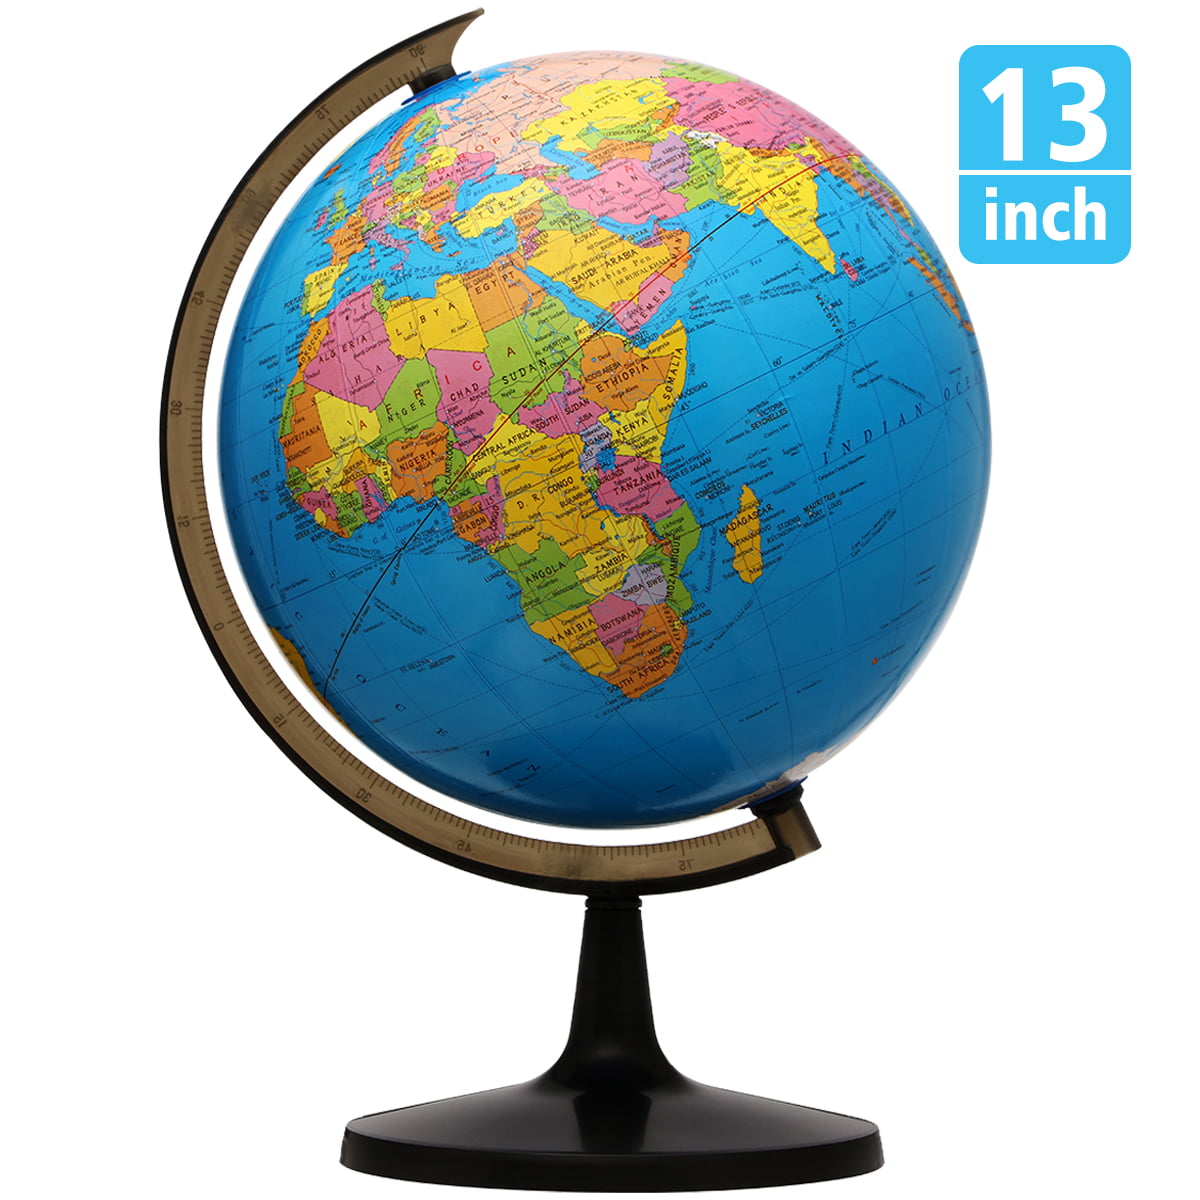 Details about   Table Top World Globe Black Decorative Desk Decor Tabletop Display Small 5 Inch 